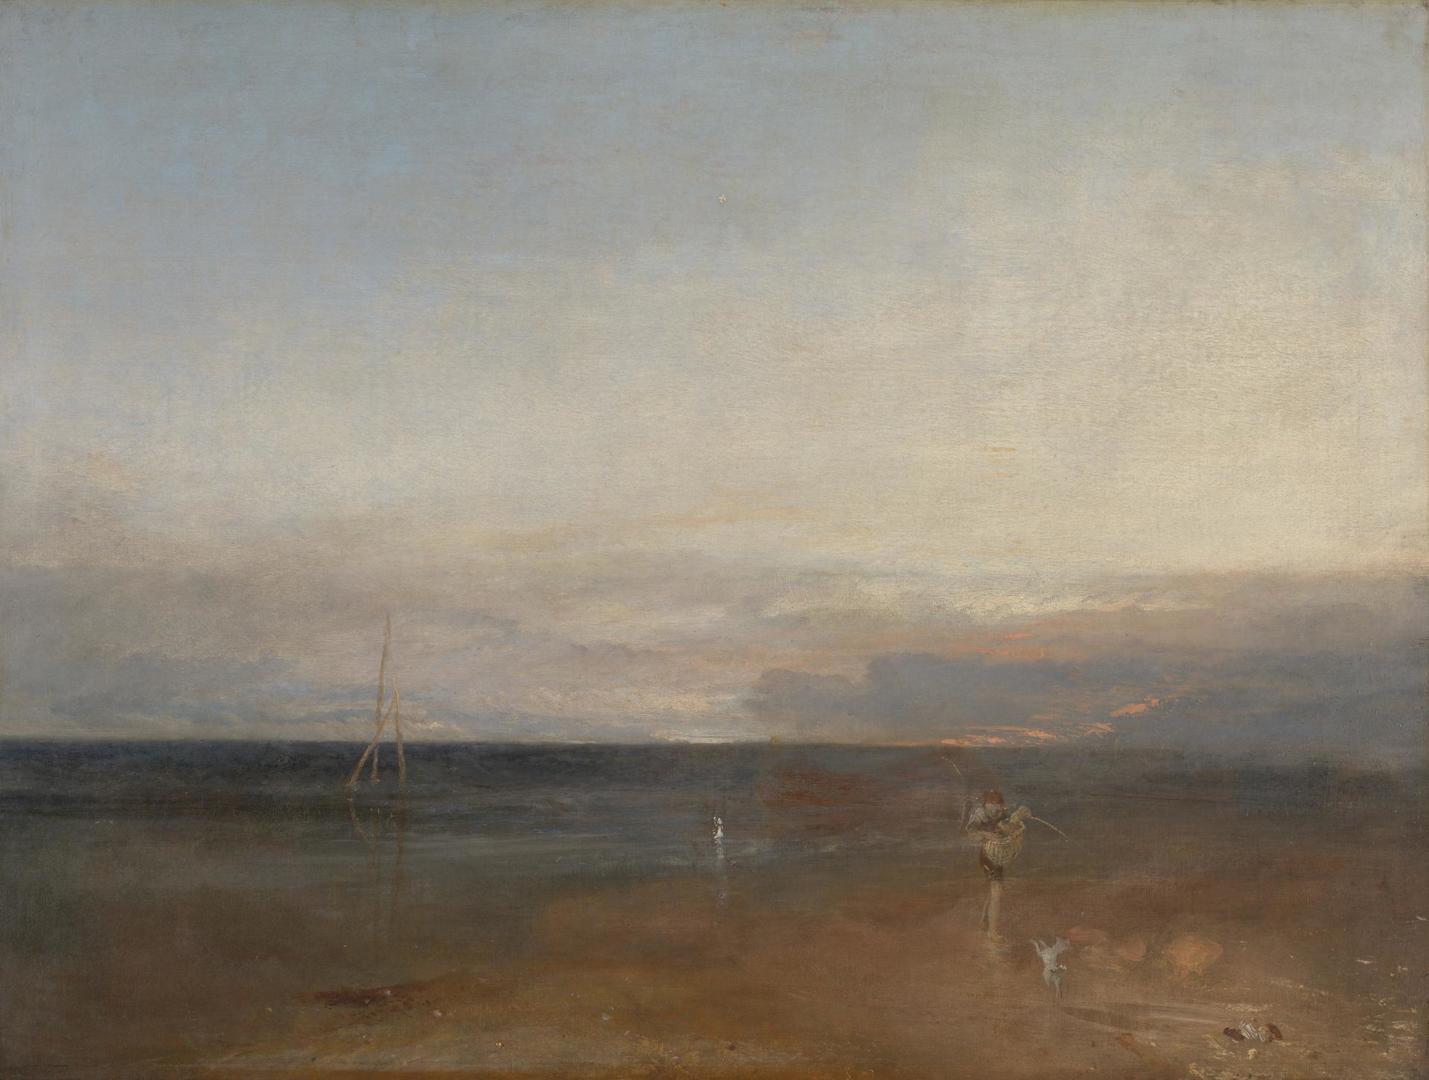 The Evening Star by Joseph Mallord William Turner